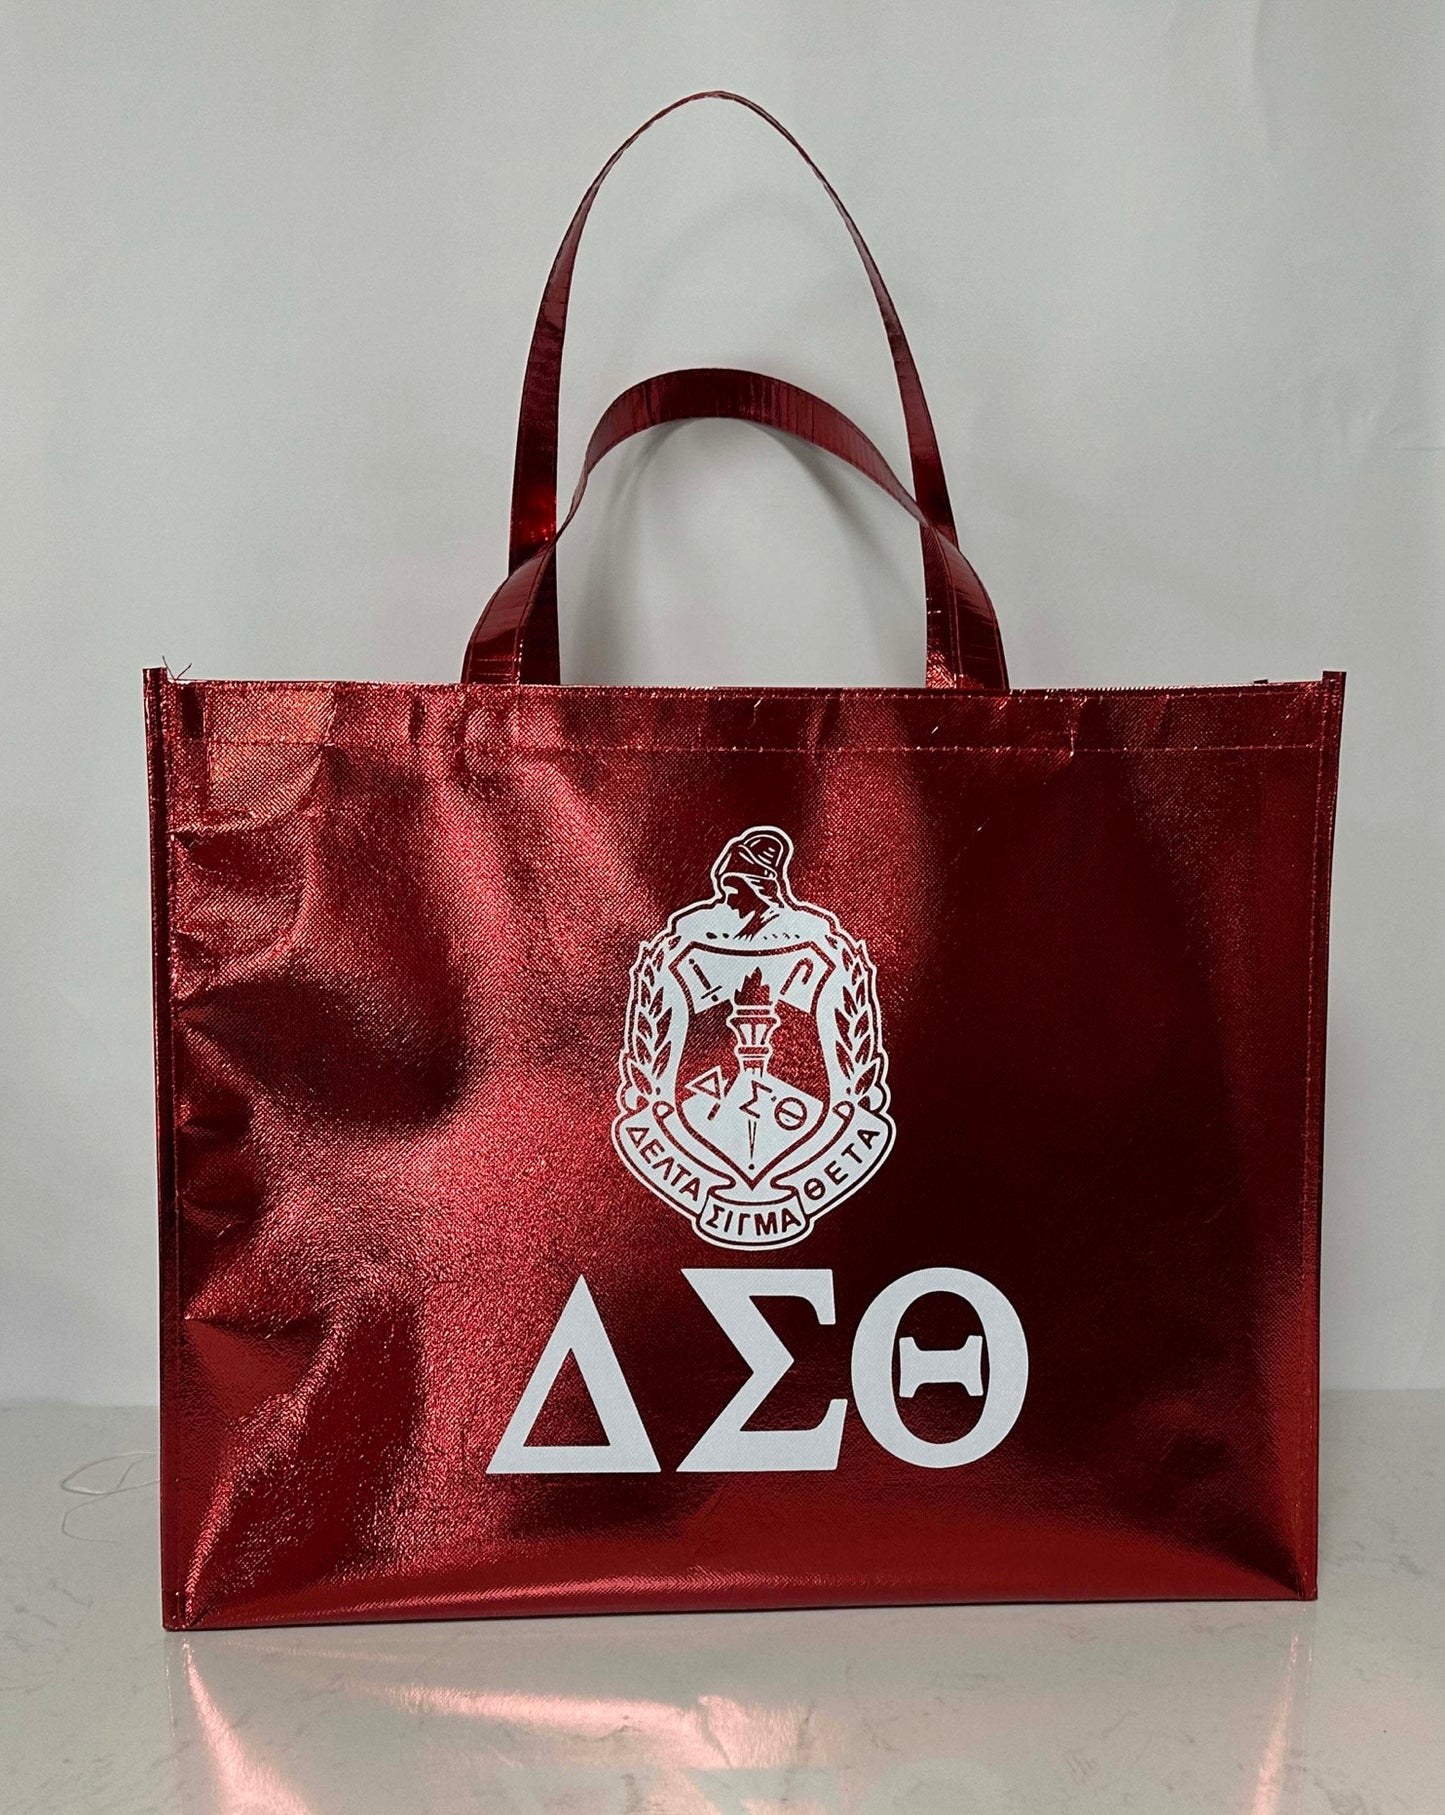 DST- The Shining shopping Tote 3.0